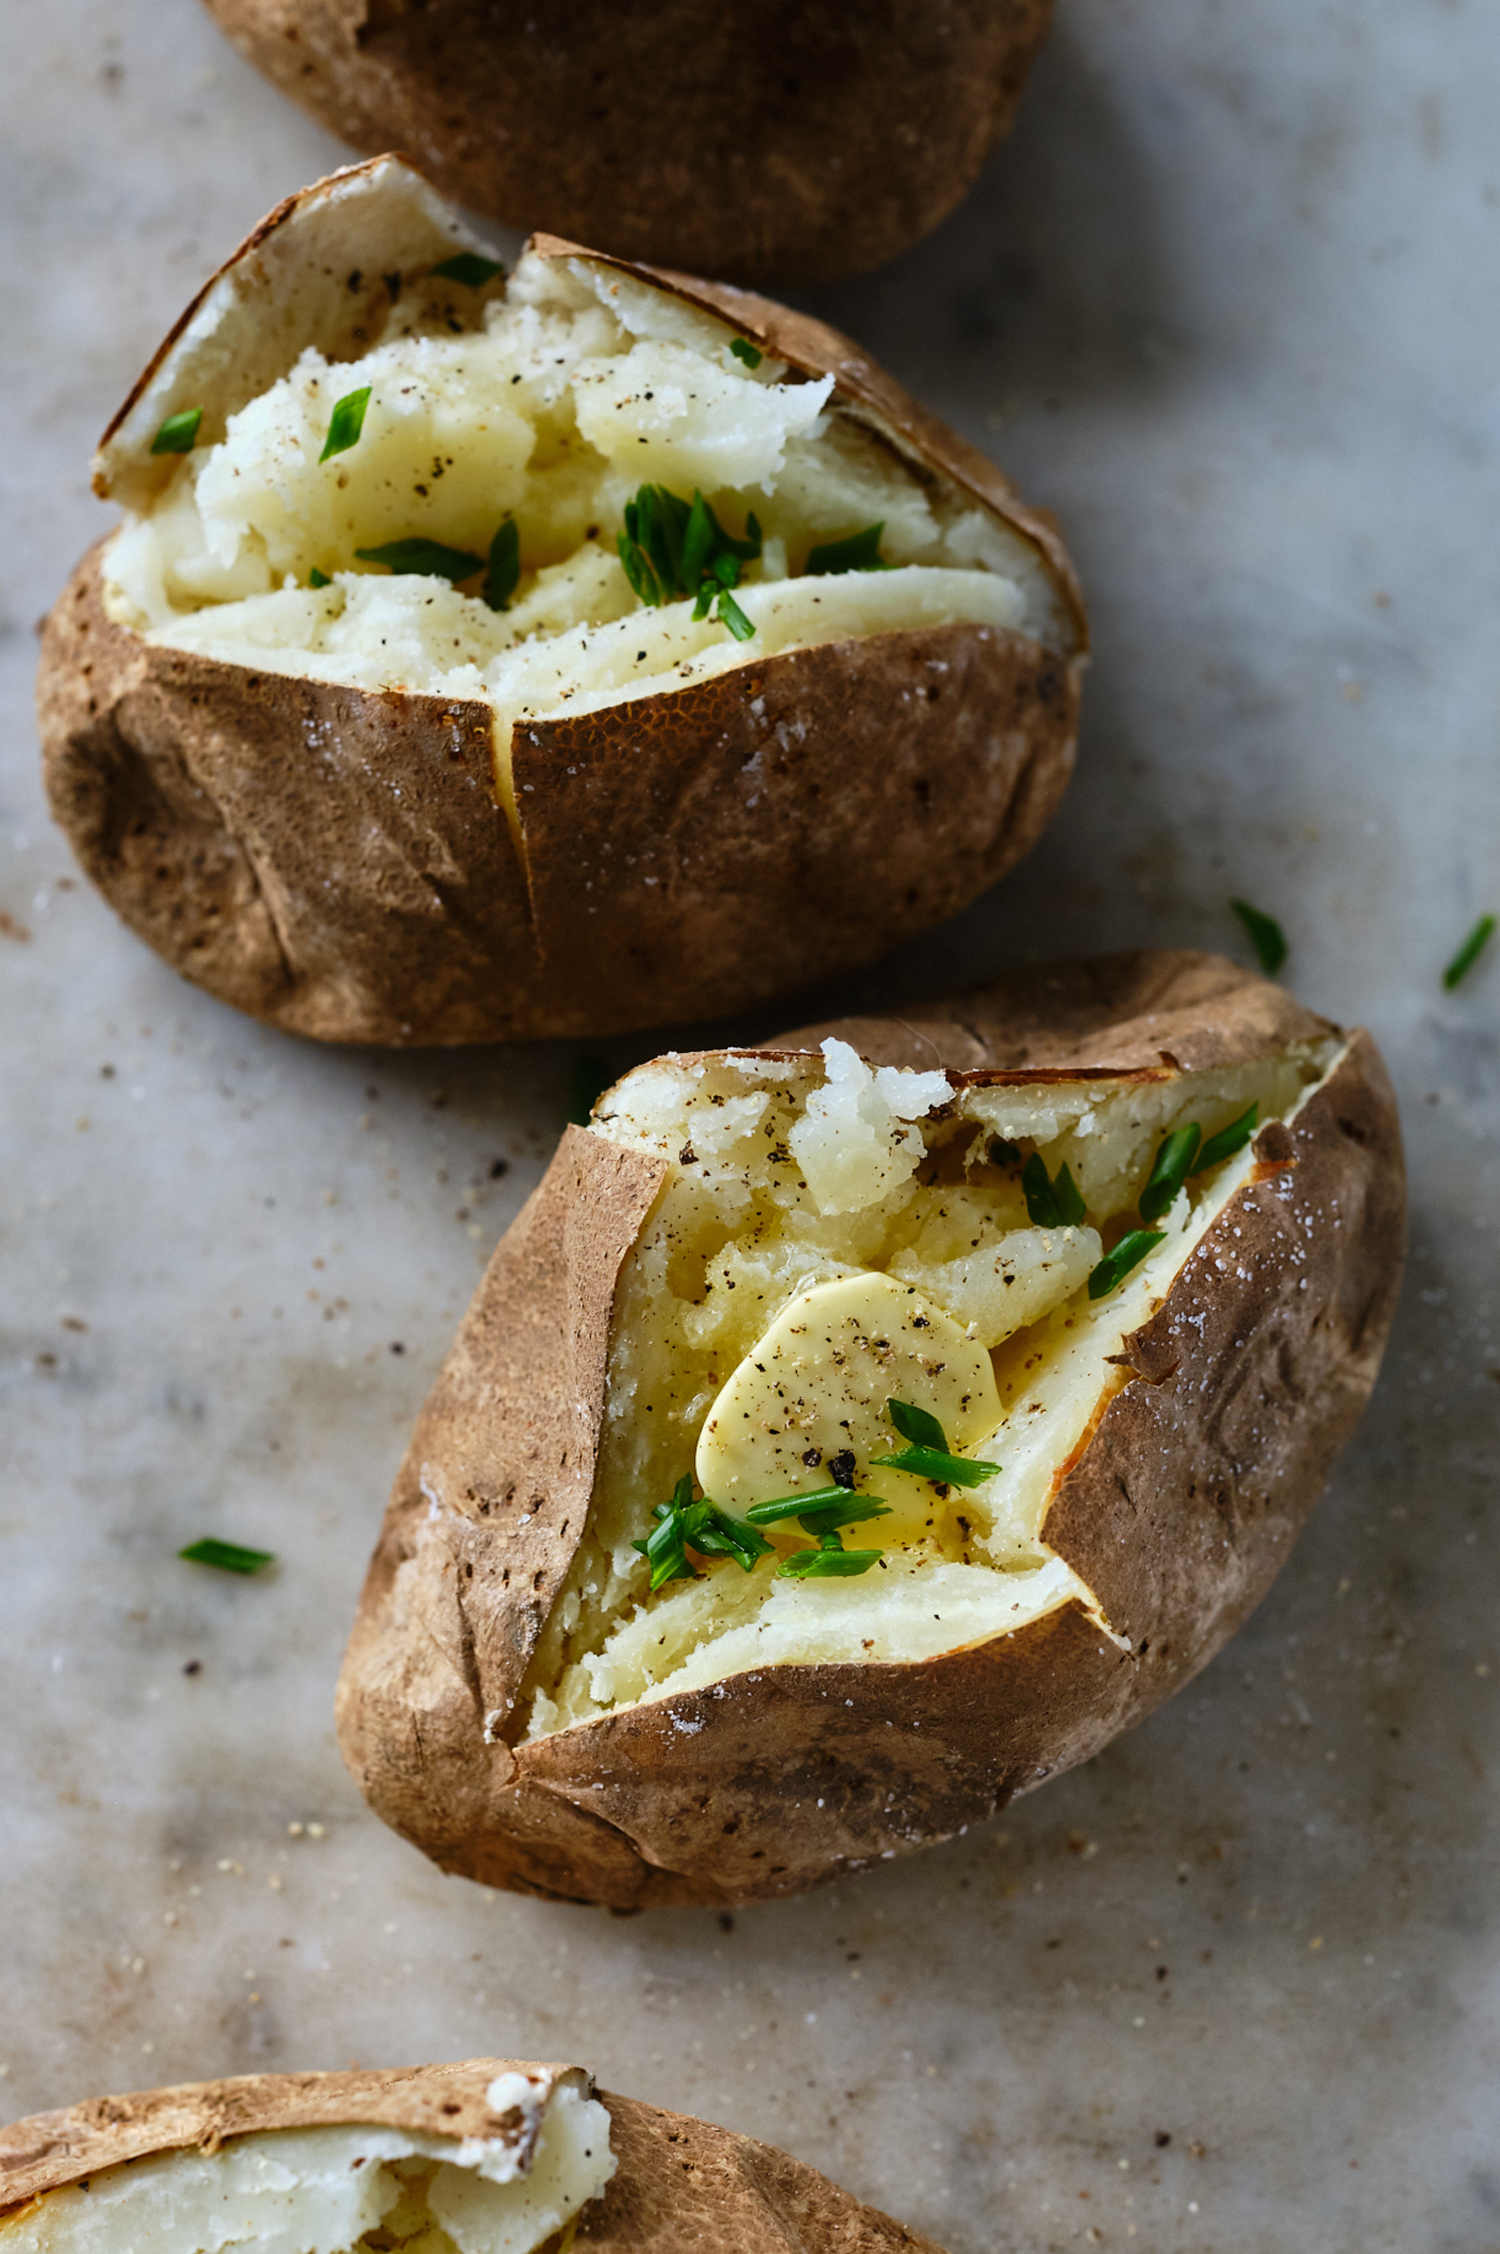 A baked potato split open and topped with butter and black pepper